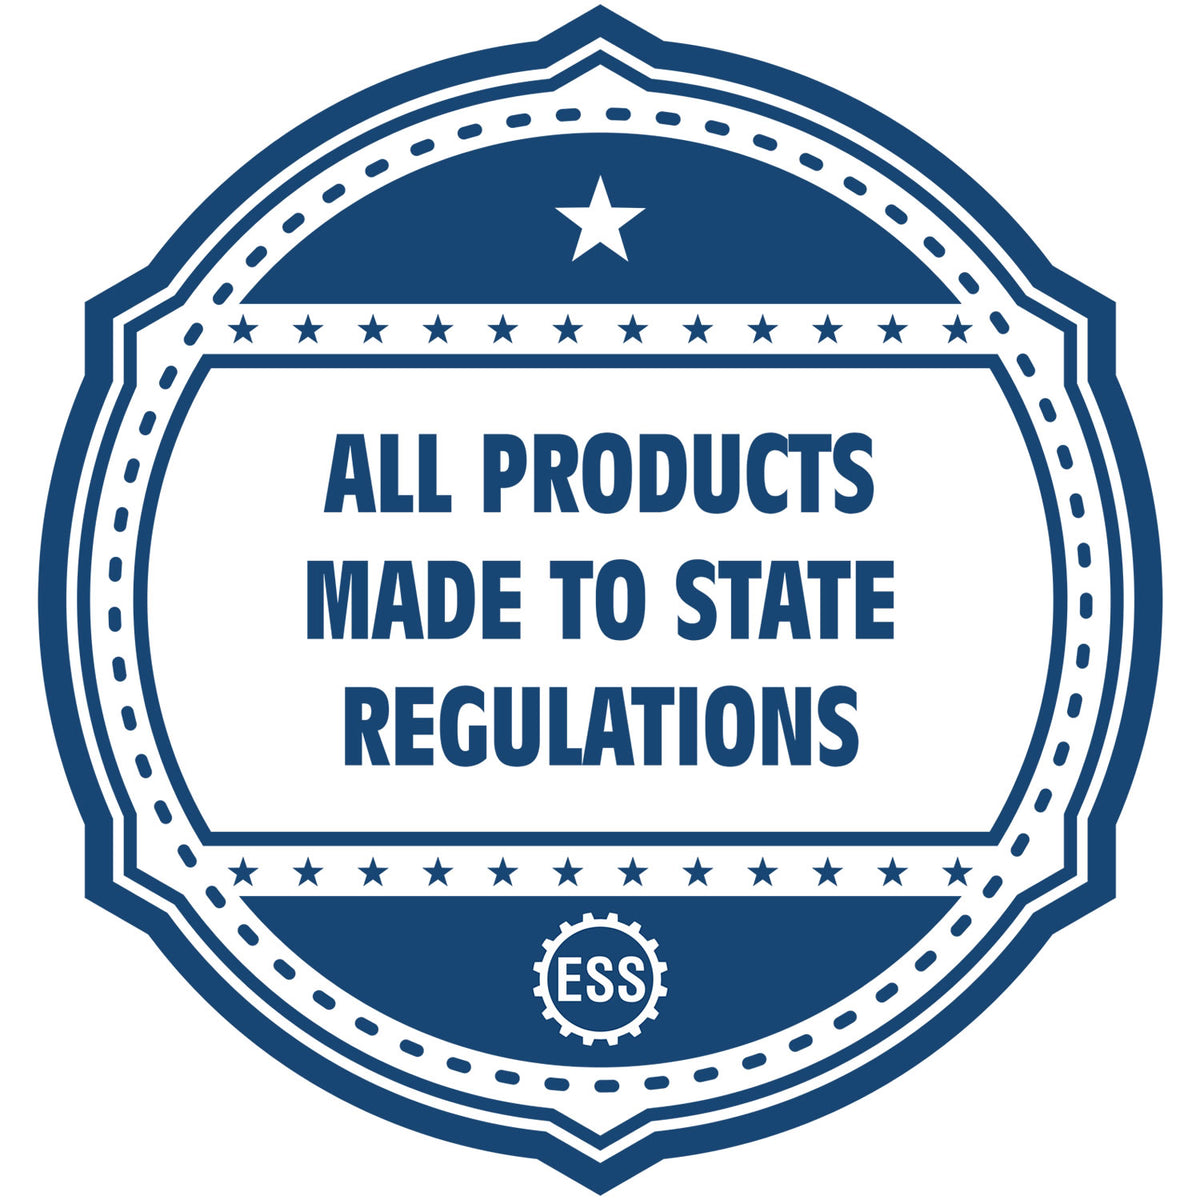 A blue icon or badge for the Heavy Duty Cast Iron Idaho Geologist Seal Embosser showing that this product is made in compliance with state regulations.